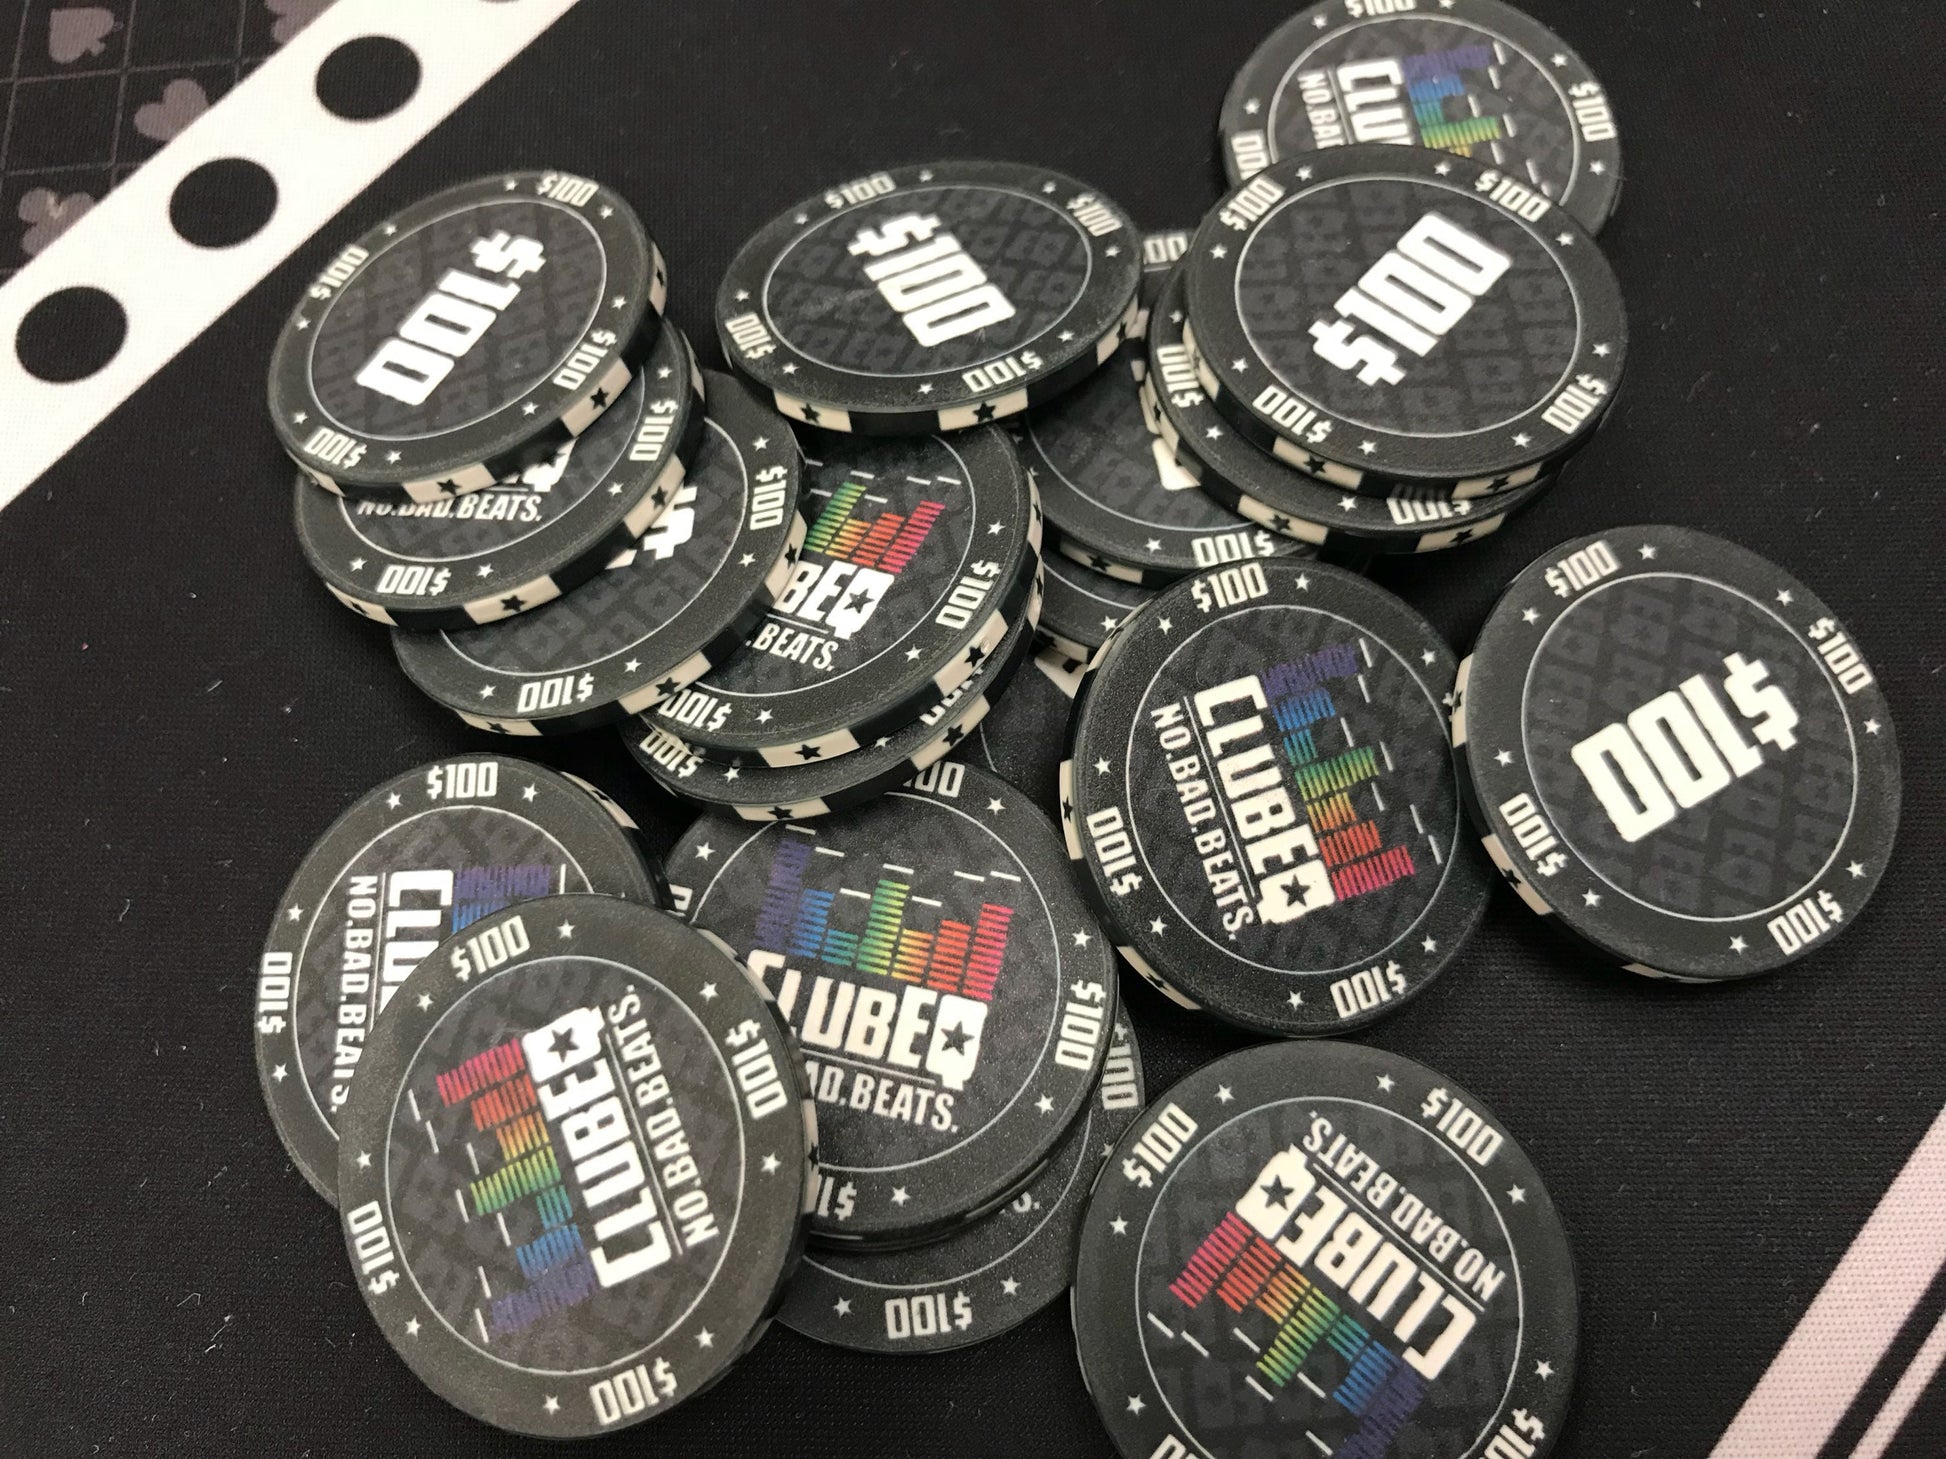 Black $100 (one hundred dollar) ClubEQ poker chips in a pot. These lively poker chips will liven up your pokergame and keep your poker players happy.